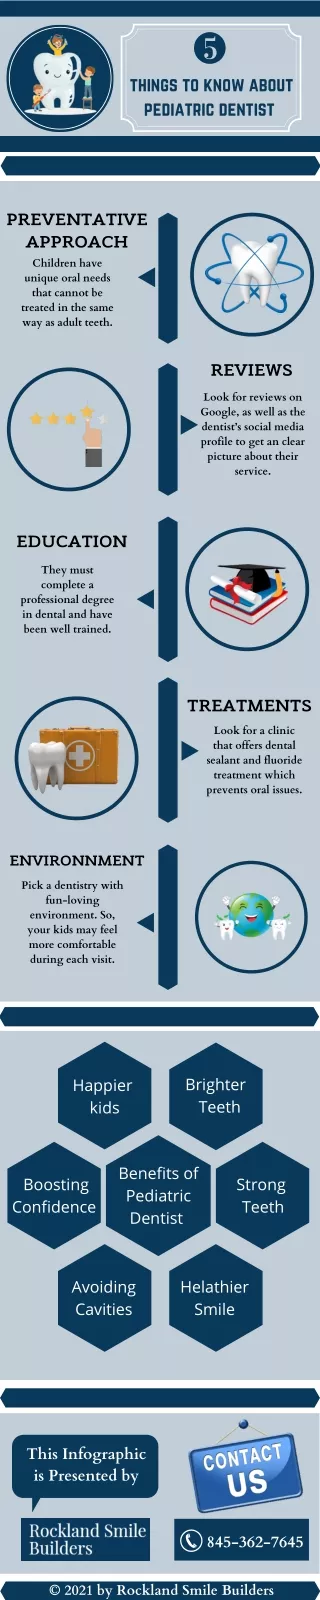 Things to Know About Pediatric Dentistry